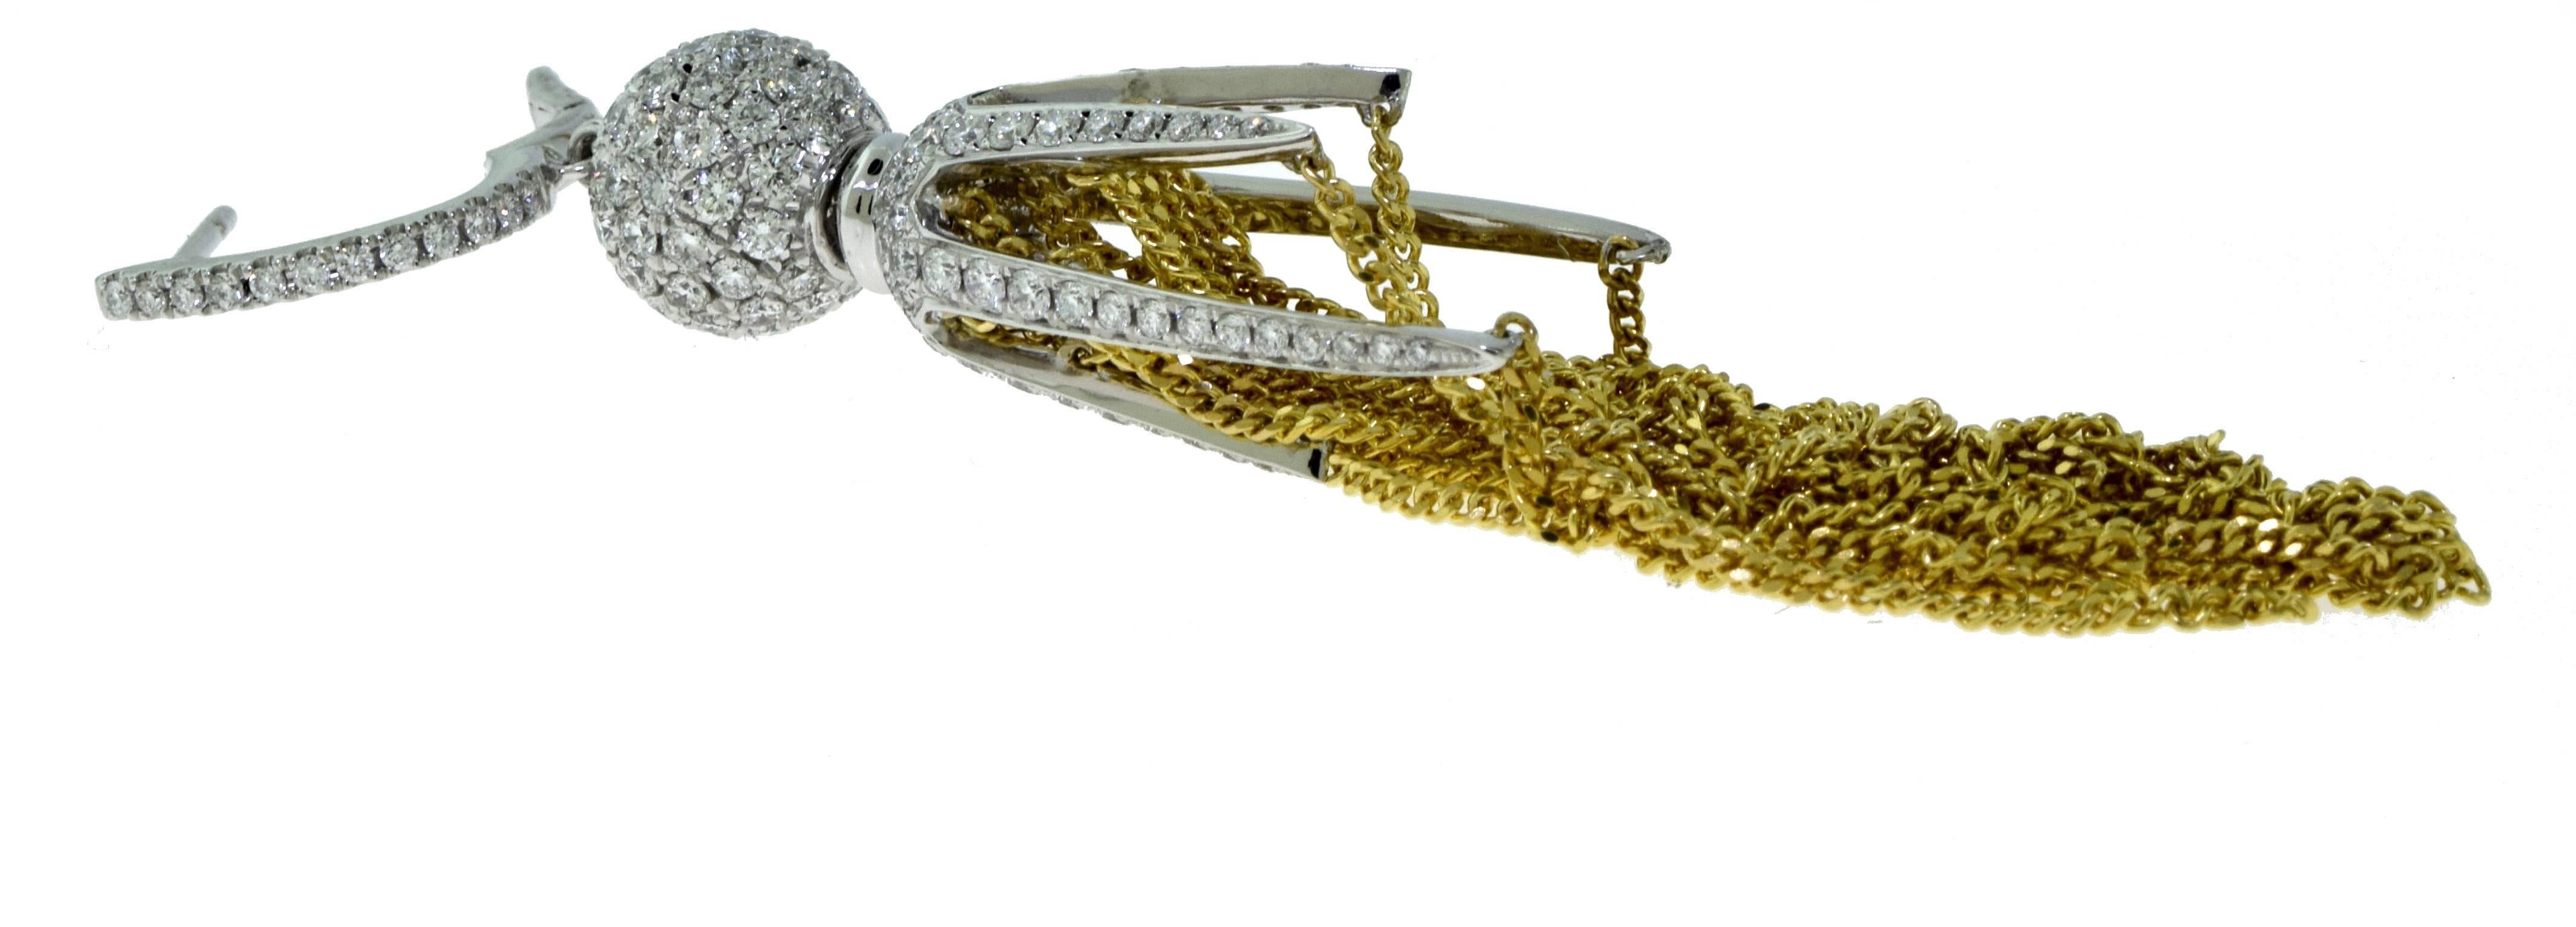 Diamond Claw Tassle Earrings in 18 Karat Yellow Gold and 18 Karat White Gold In Excellent Condition For Sale In Miami, FL